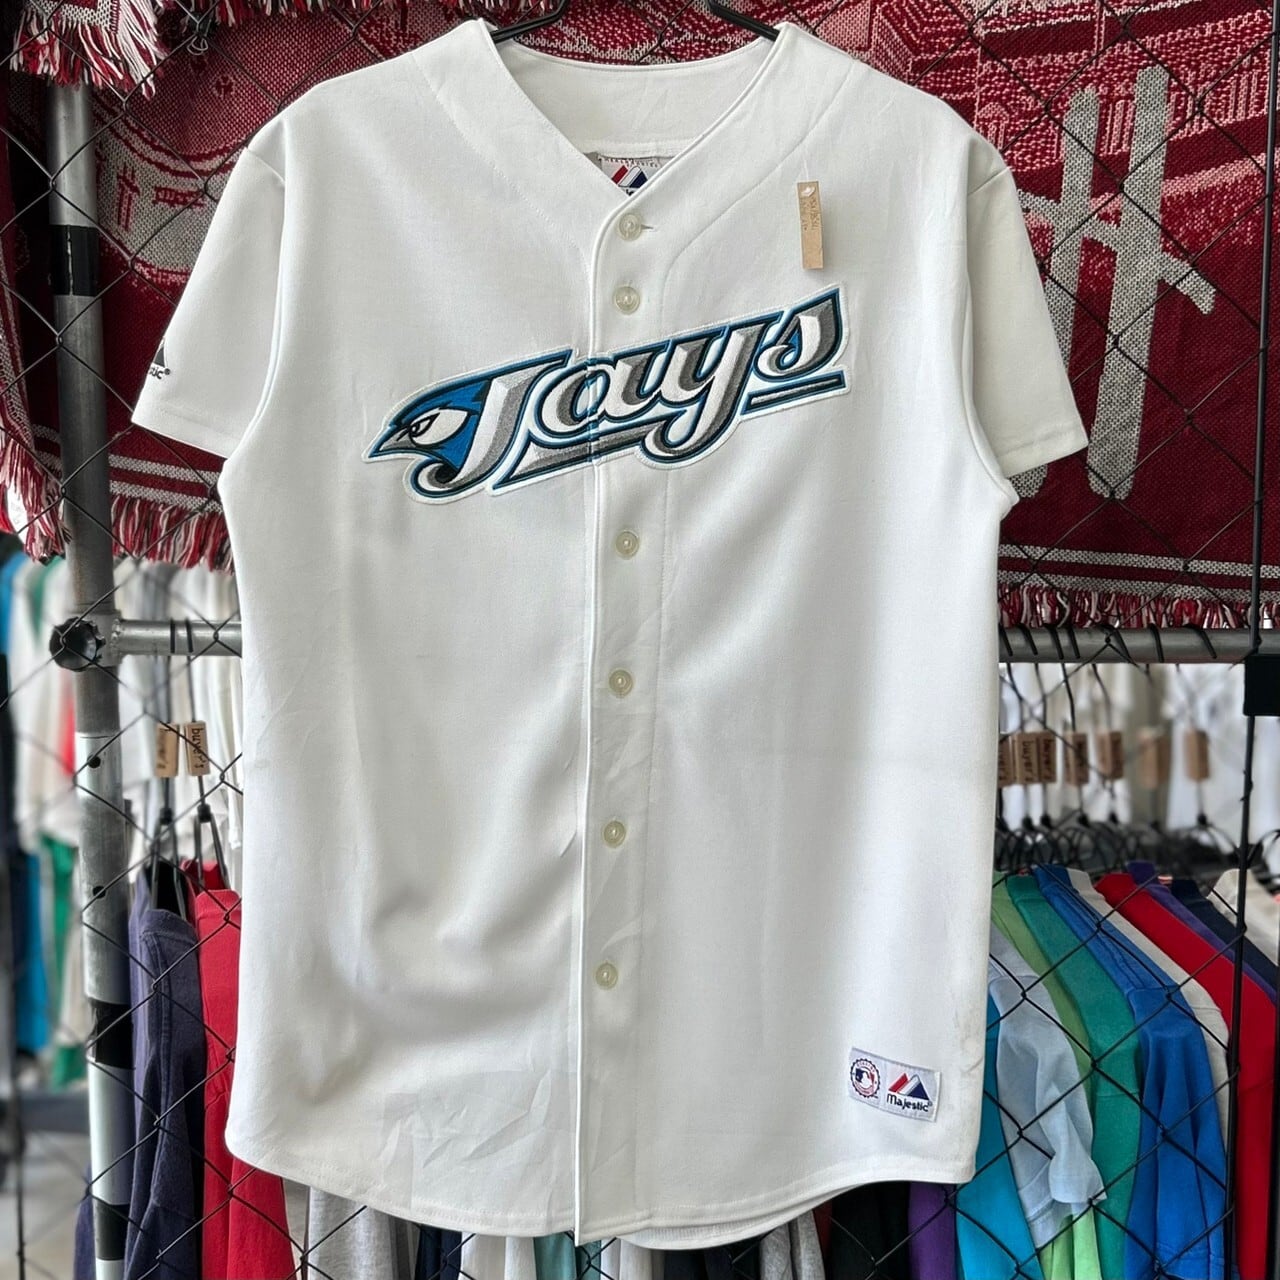 vintage アメリカ古着 青 チームロゴ Blue jays スタジャン-